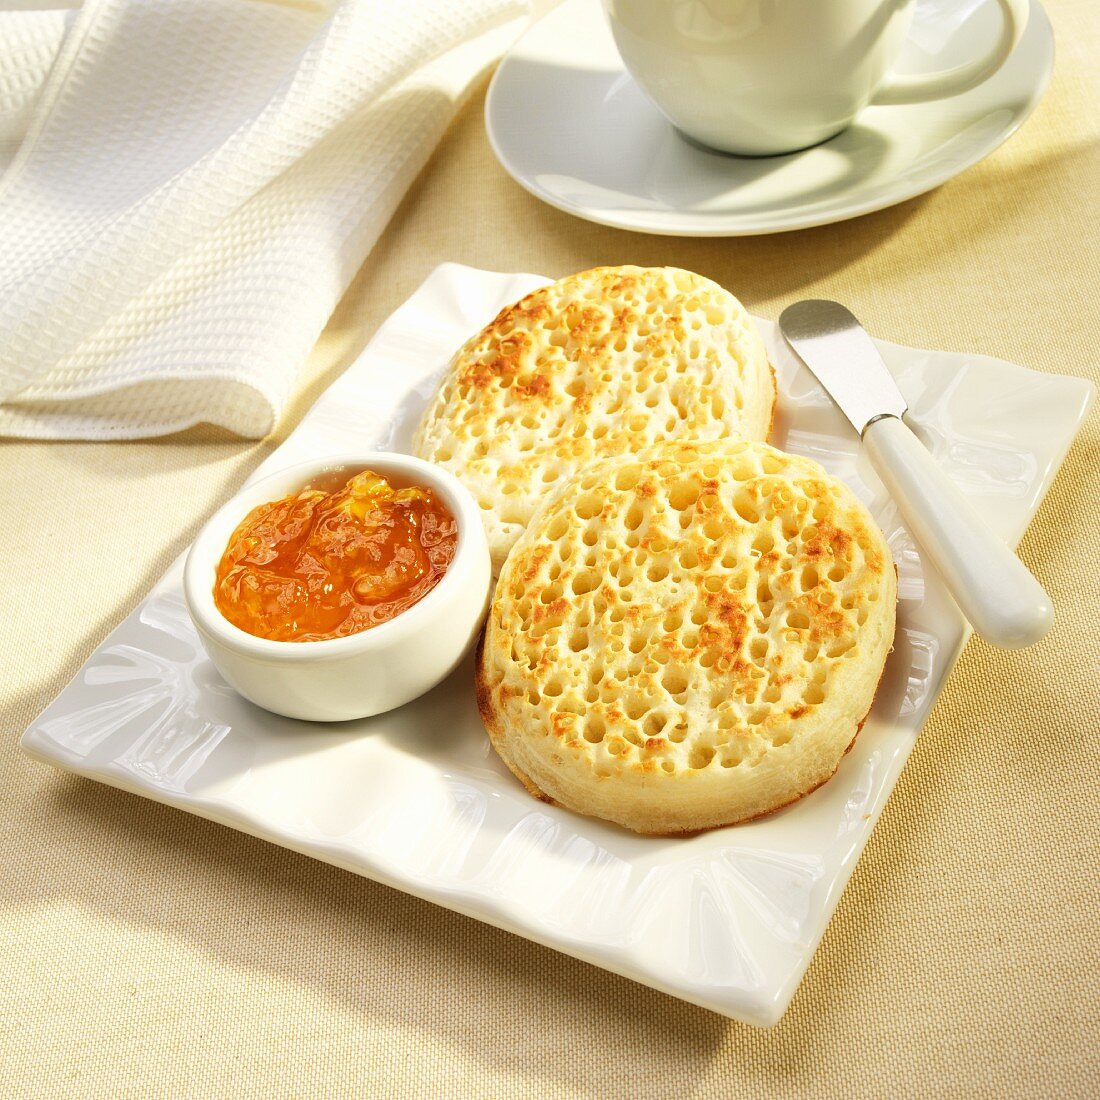 Toasted Crumpets with Orange Marmalade